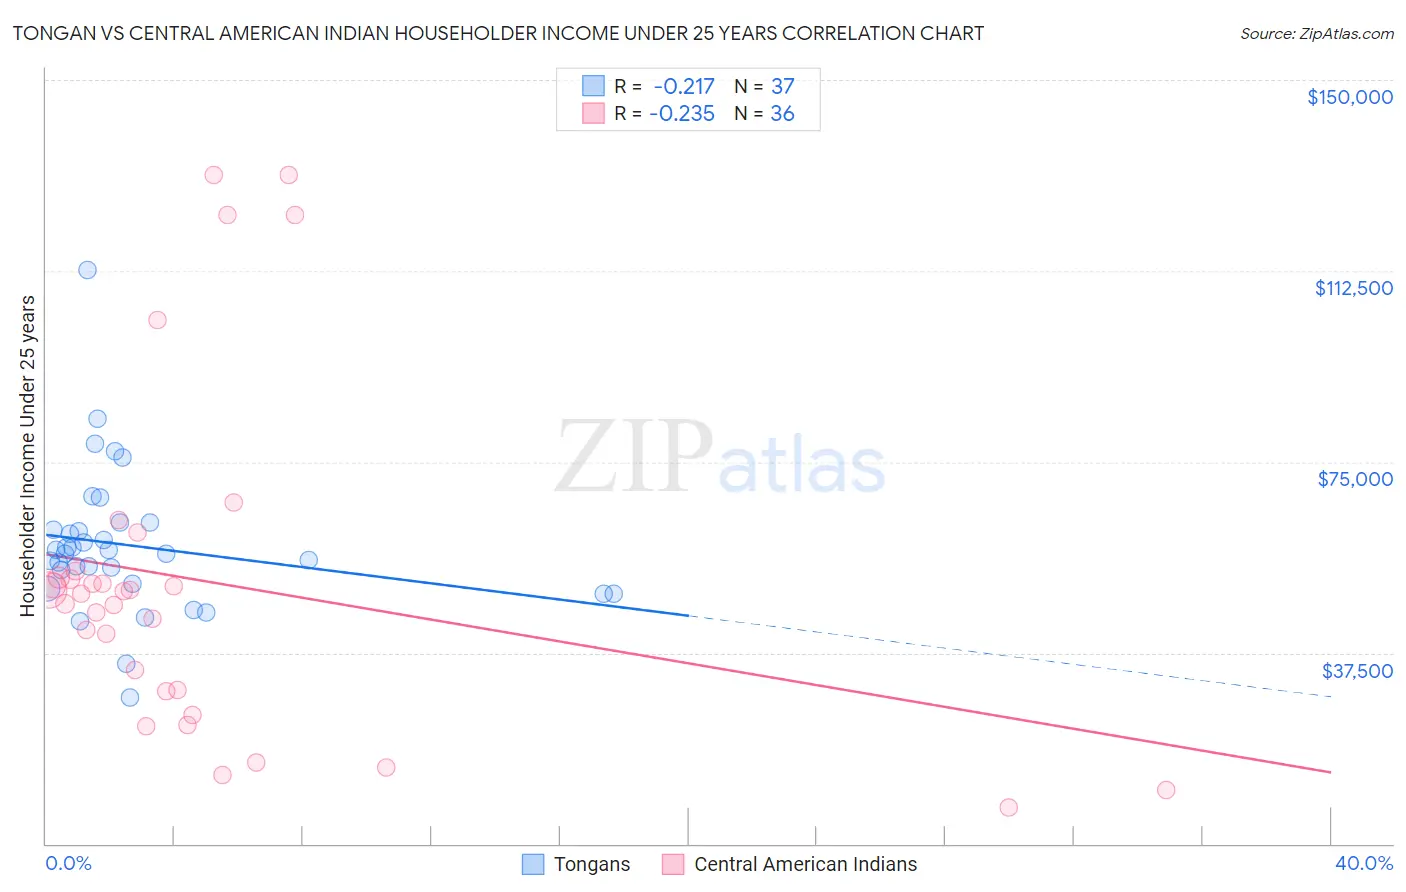 Tongan vs Central American Indian Householder Income Under 25 years